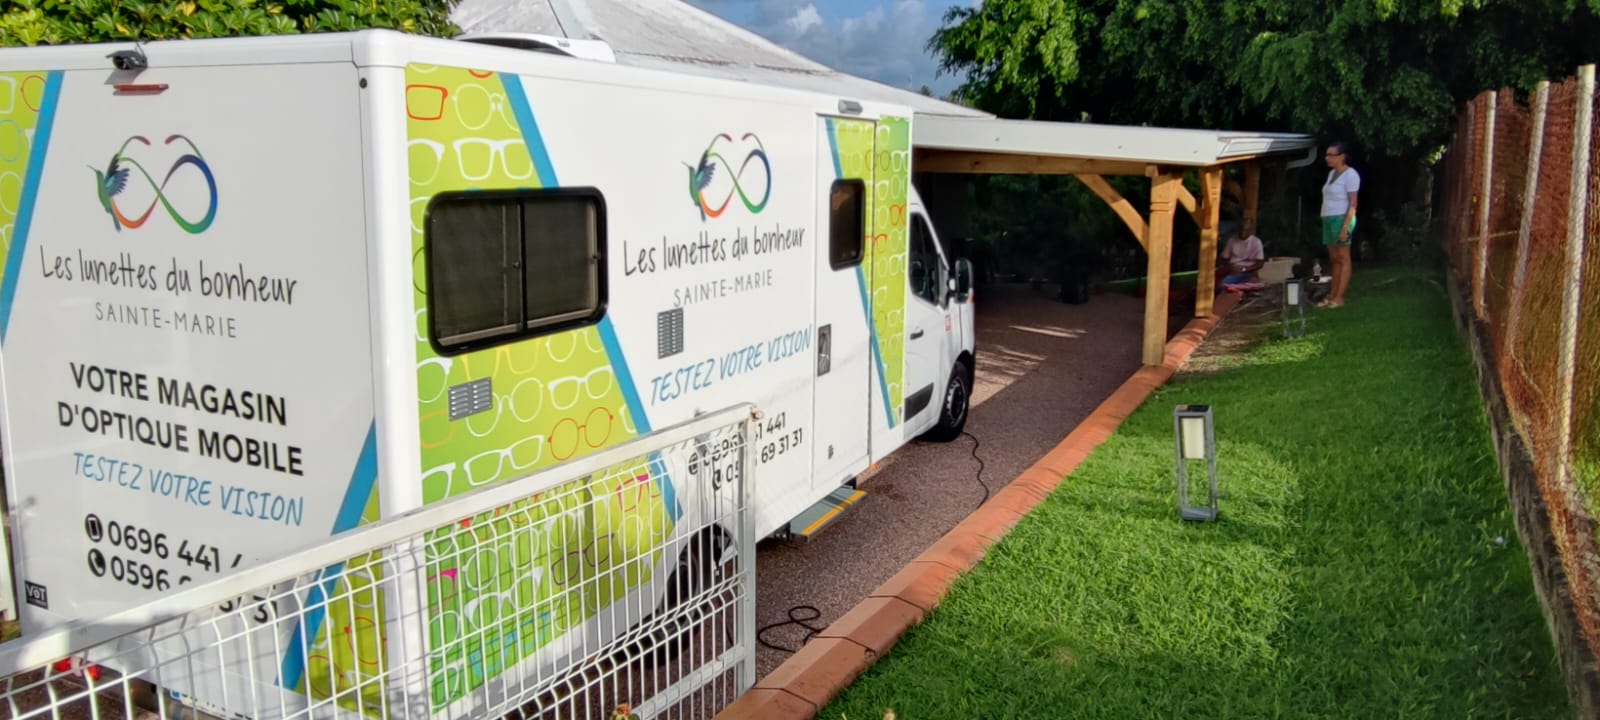 camion itinerant opticien professionnel